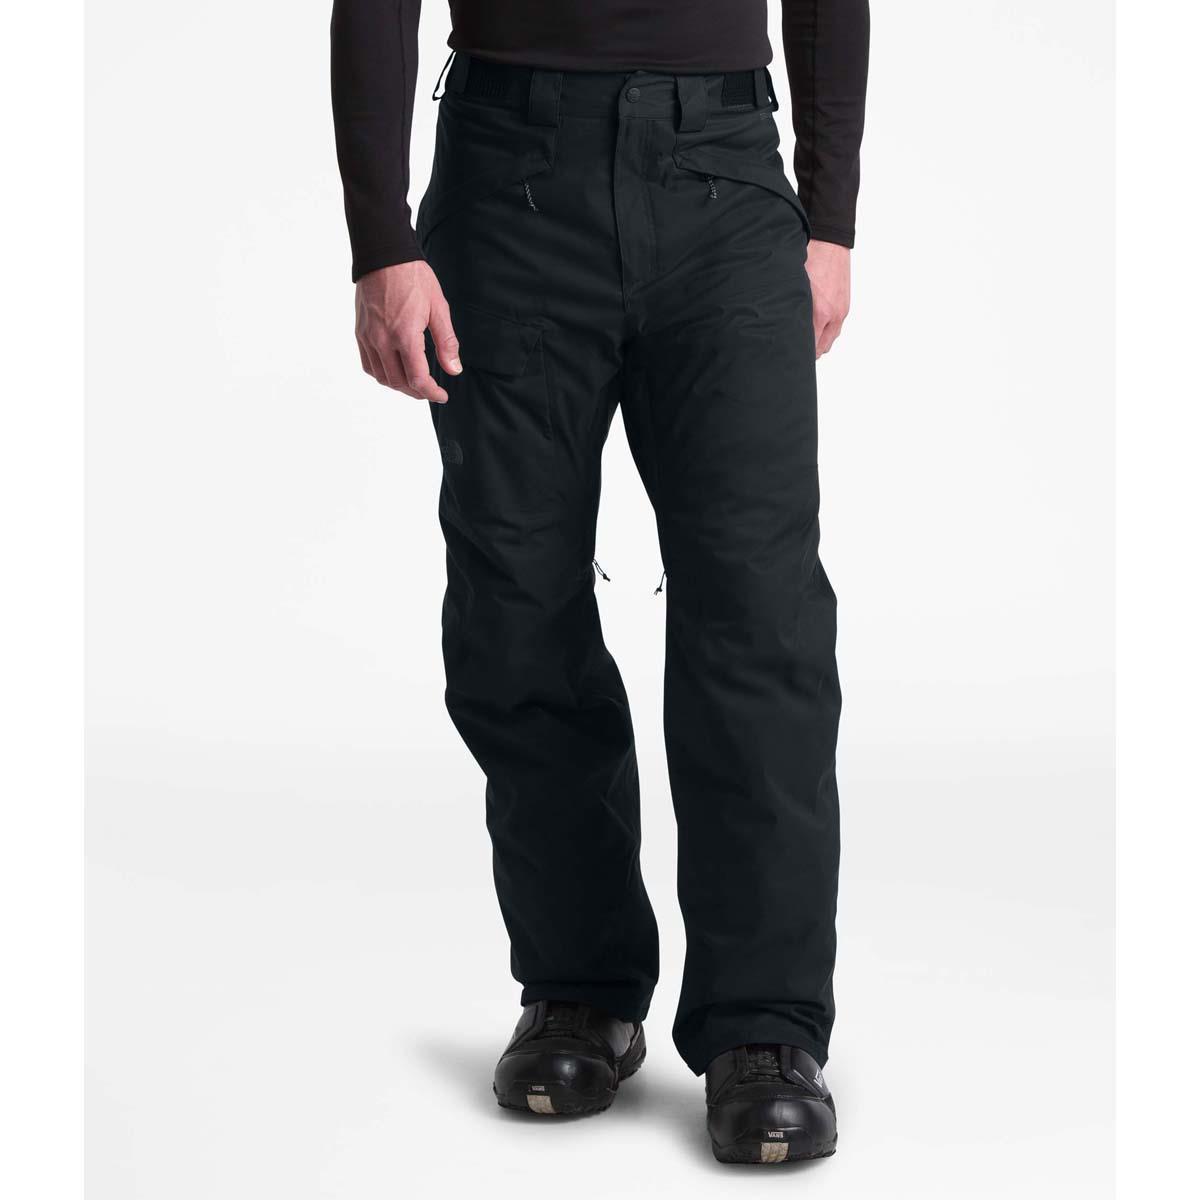 north face insulated snow pants